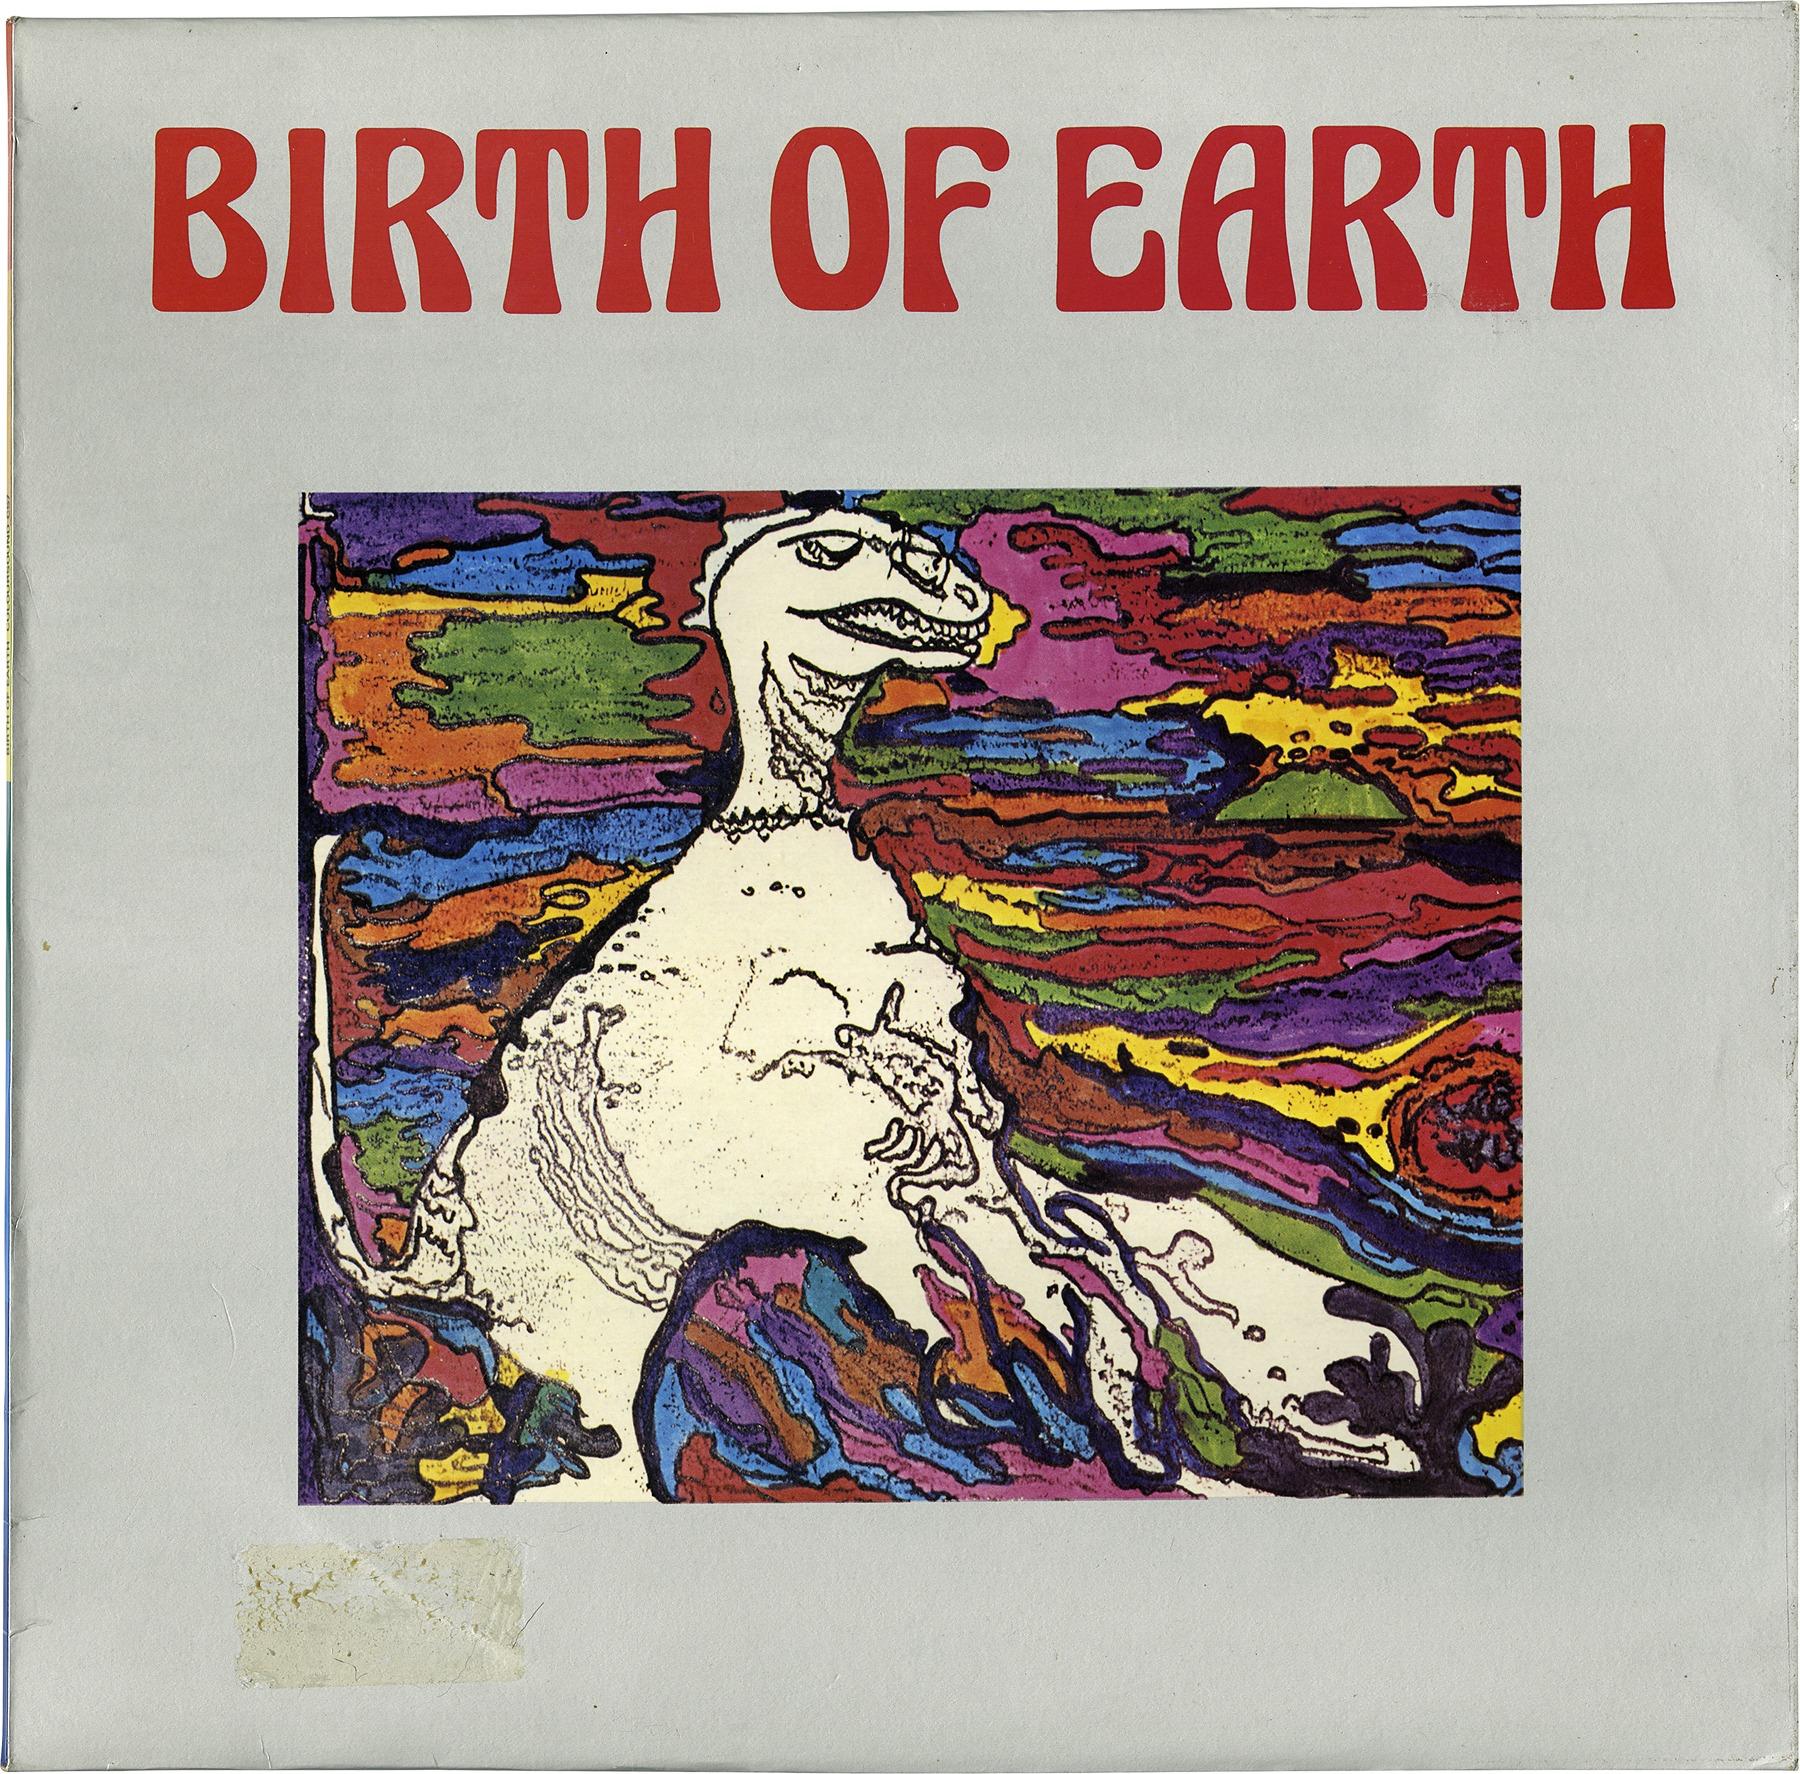 “Birth of Earth,” a 1980 record by Joel Vandroogenbroeck for the German library Coloursound.